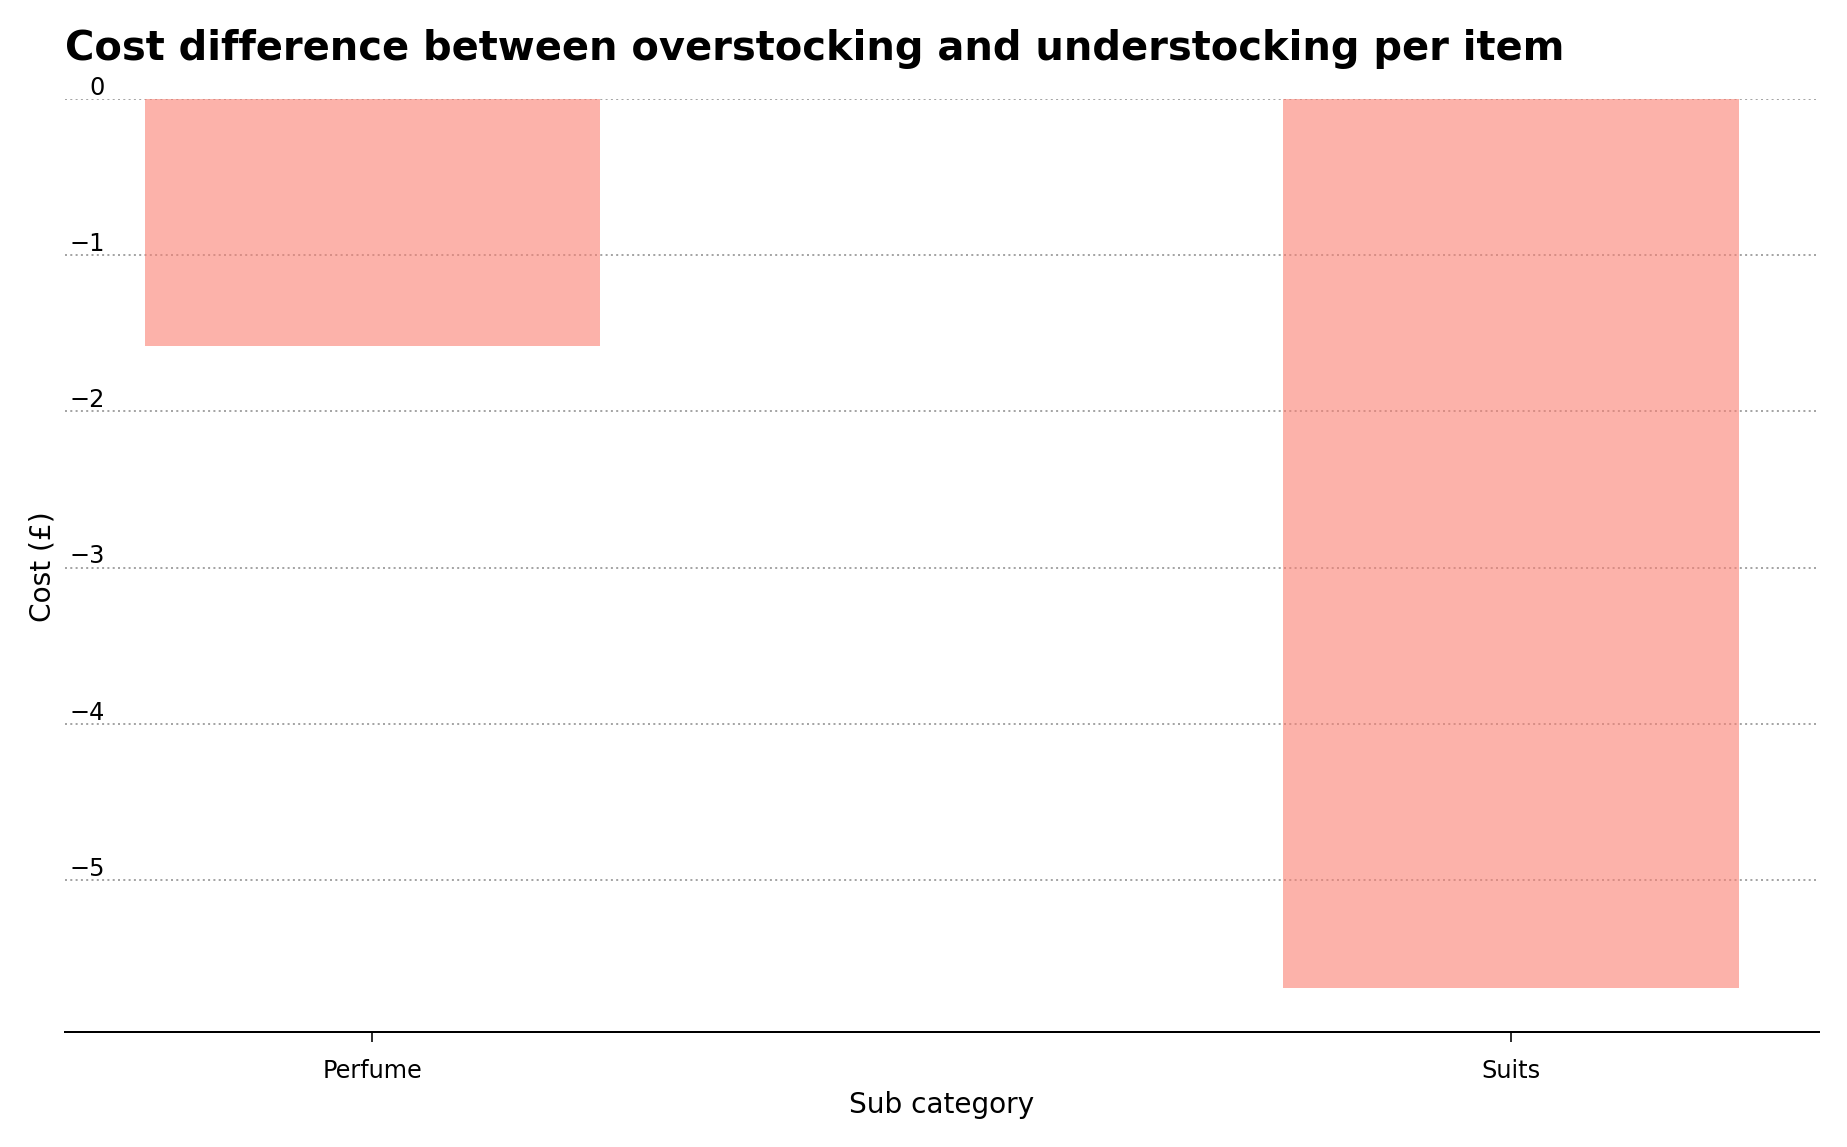 Negative difference between overstocking and understocking costs for the top two sub-categories